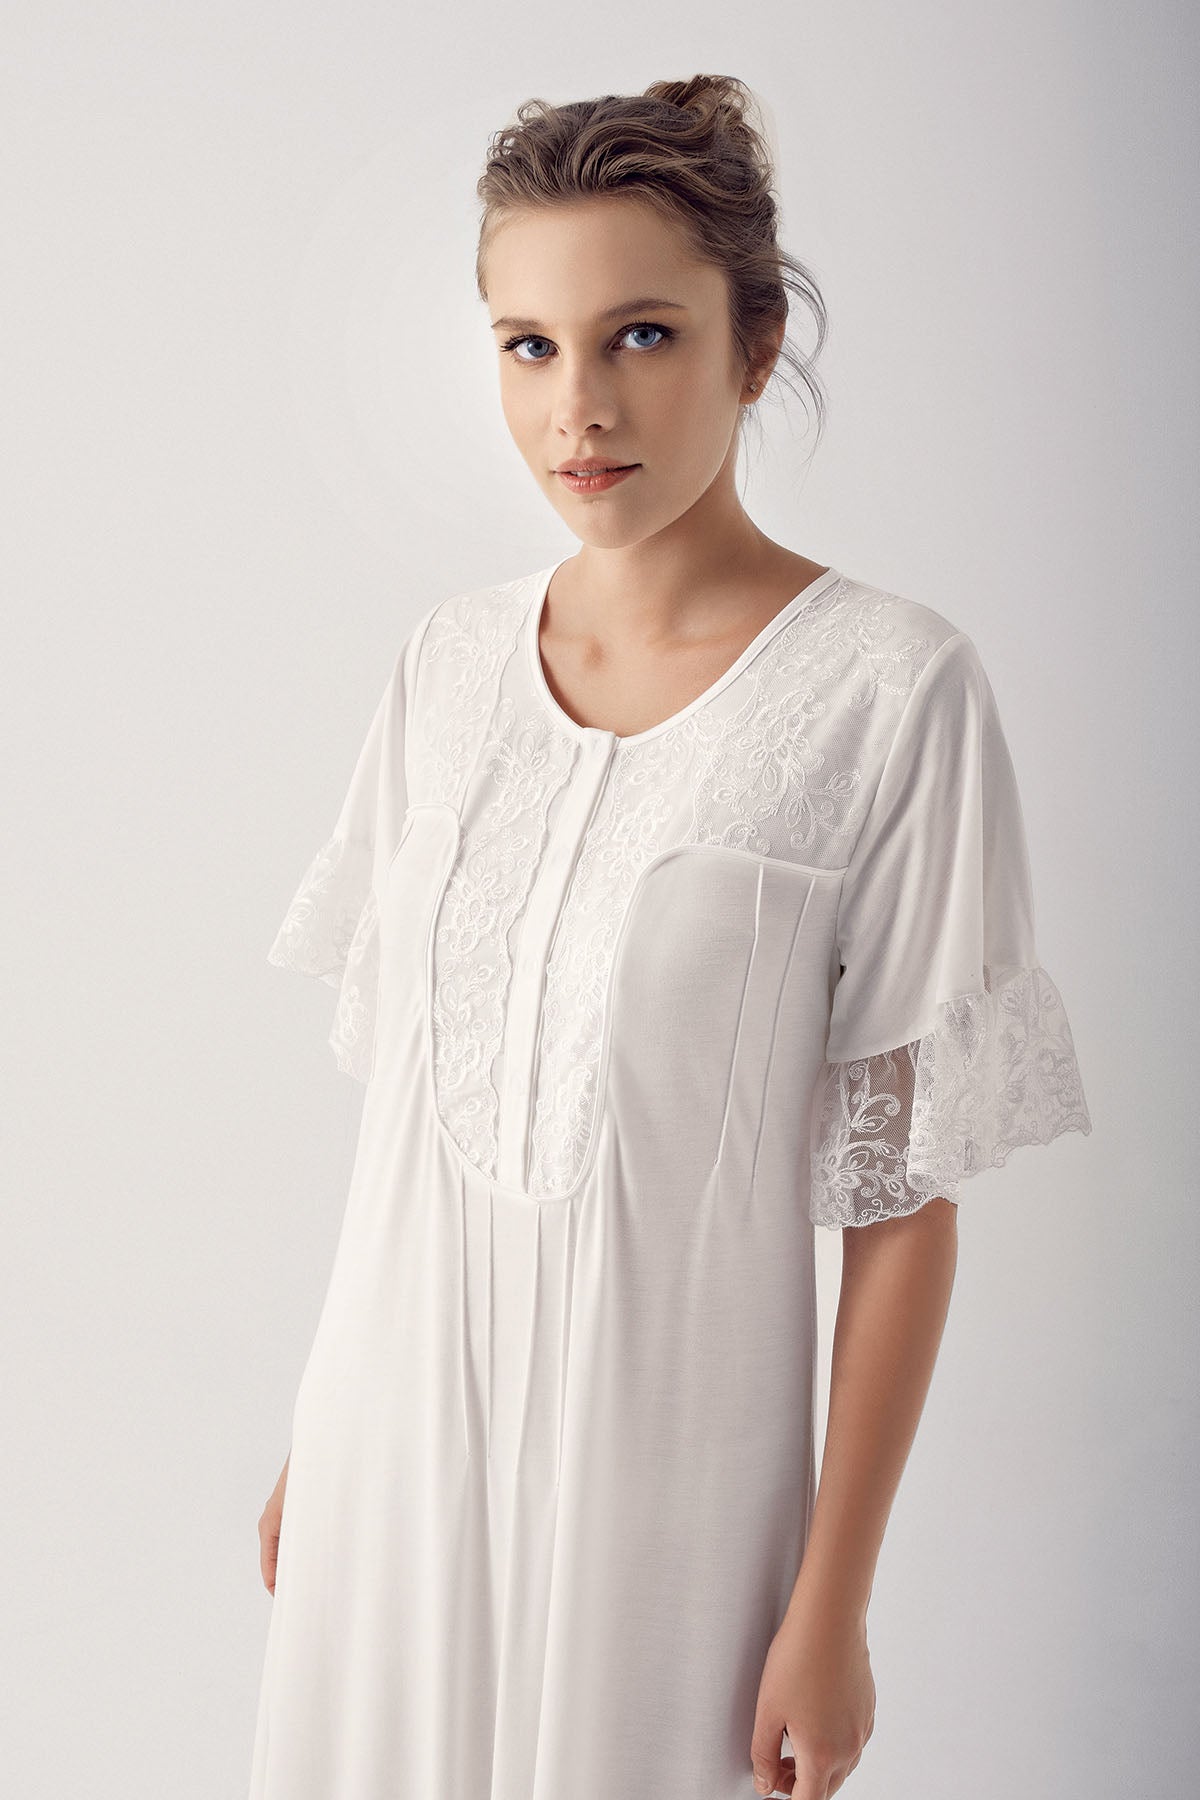 Shopymommy 55103 Elegance Lace Sleeves Maternity & Nursing Nightgown P